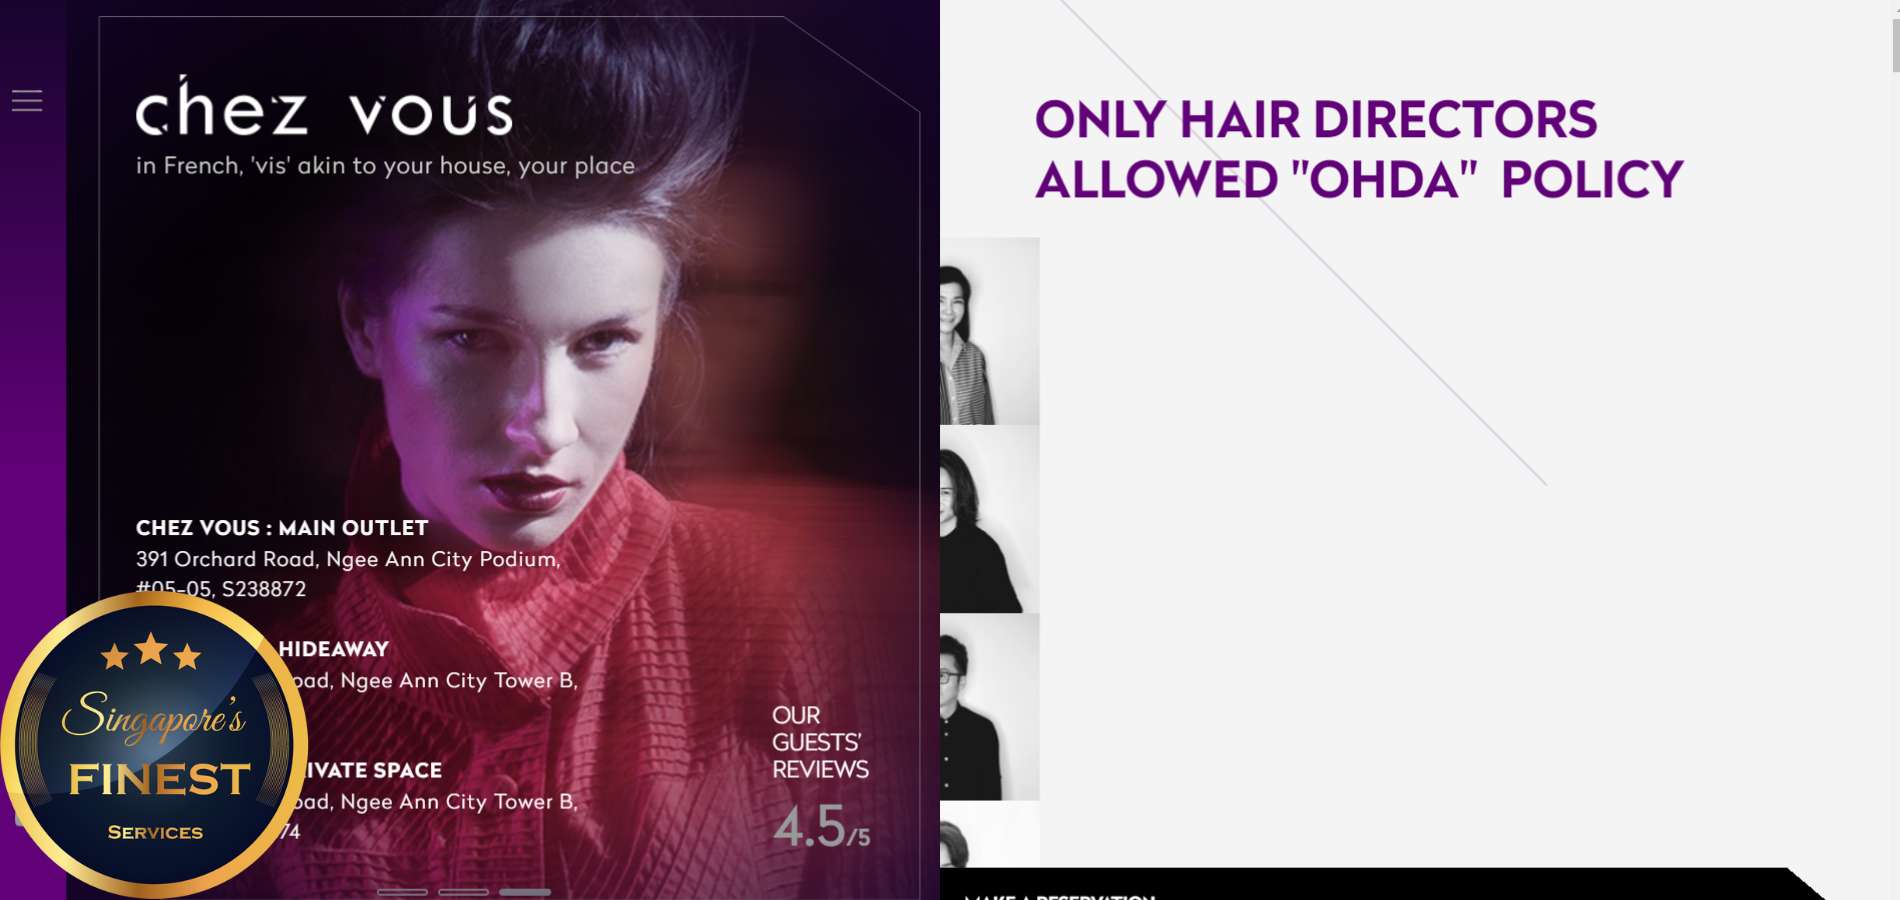 The Finest Salons for Hair Color Service in Singapore